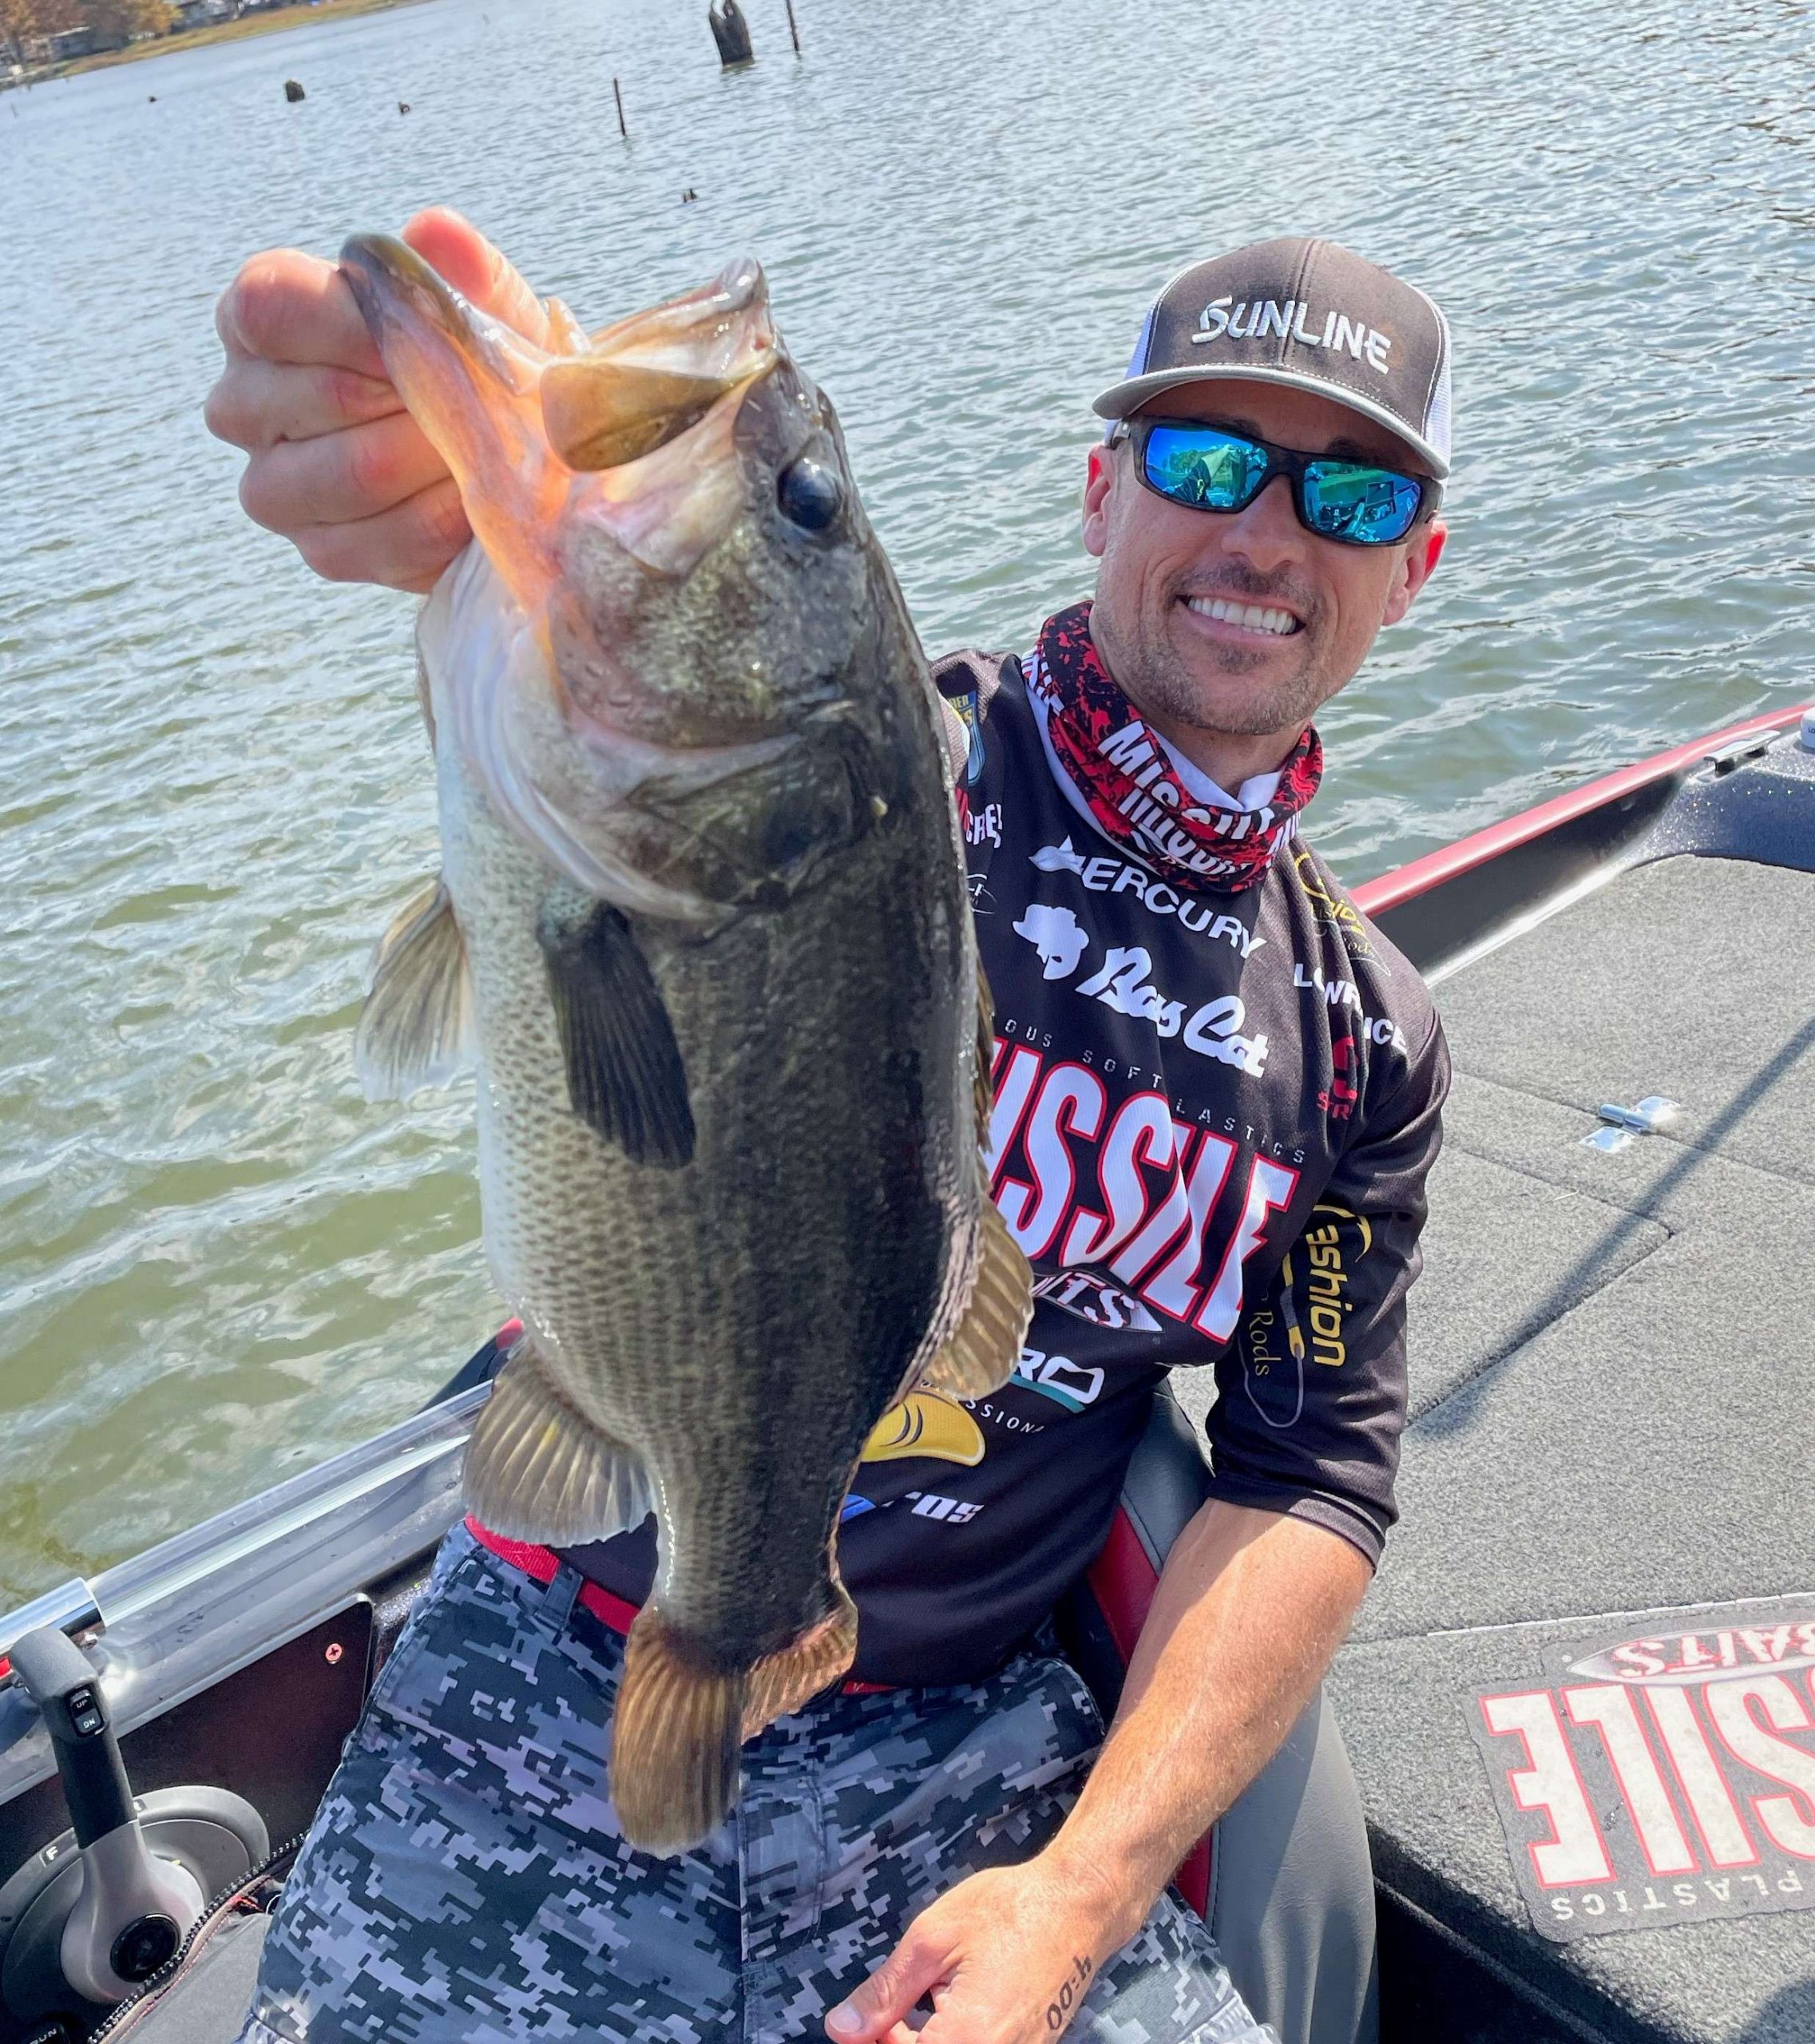 Day 1 action at the 2020 Toyota Bassmaster Texas Fest benefiting Texas Parks and Wildlife Department from the Judges! At Texas Fest a Judge rides along with each angler, weighing the fish and recording the weights in BASSTrakk. They also send us lots of great photos!